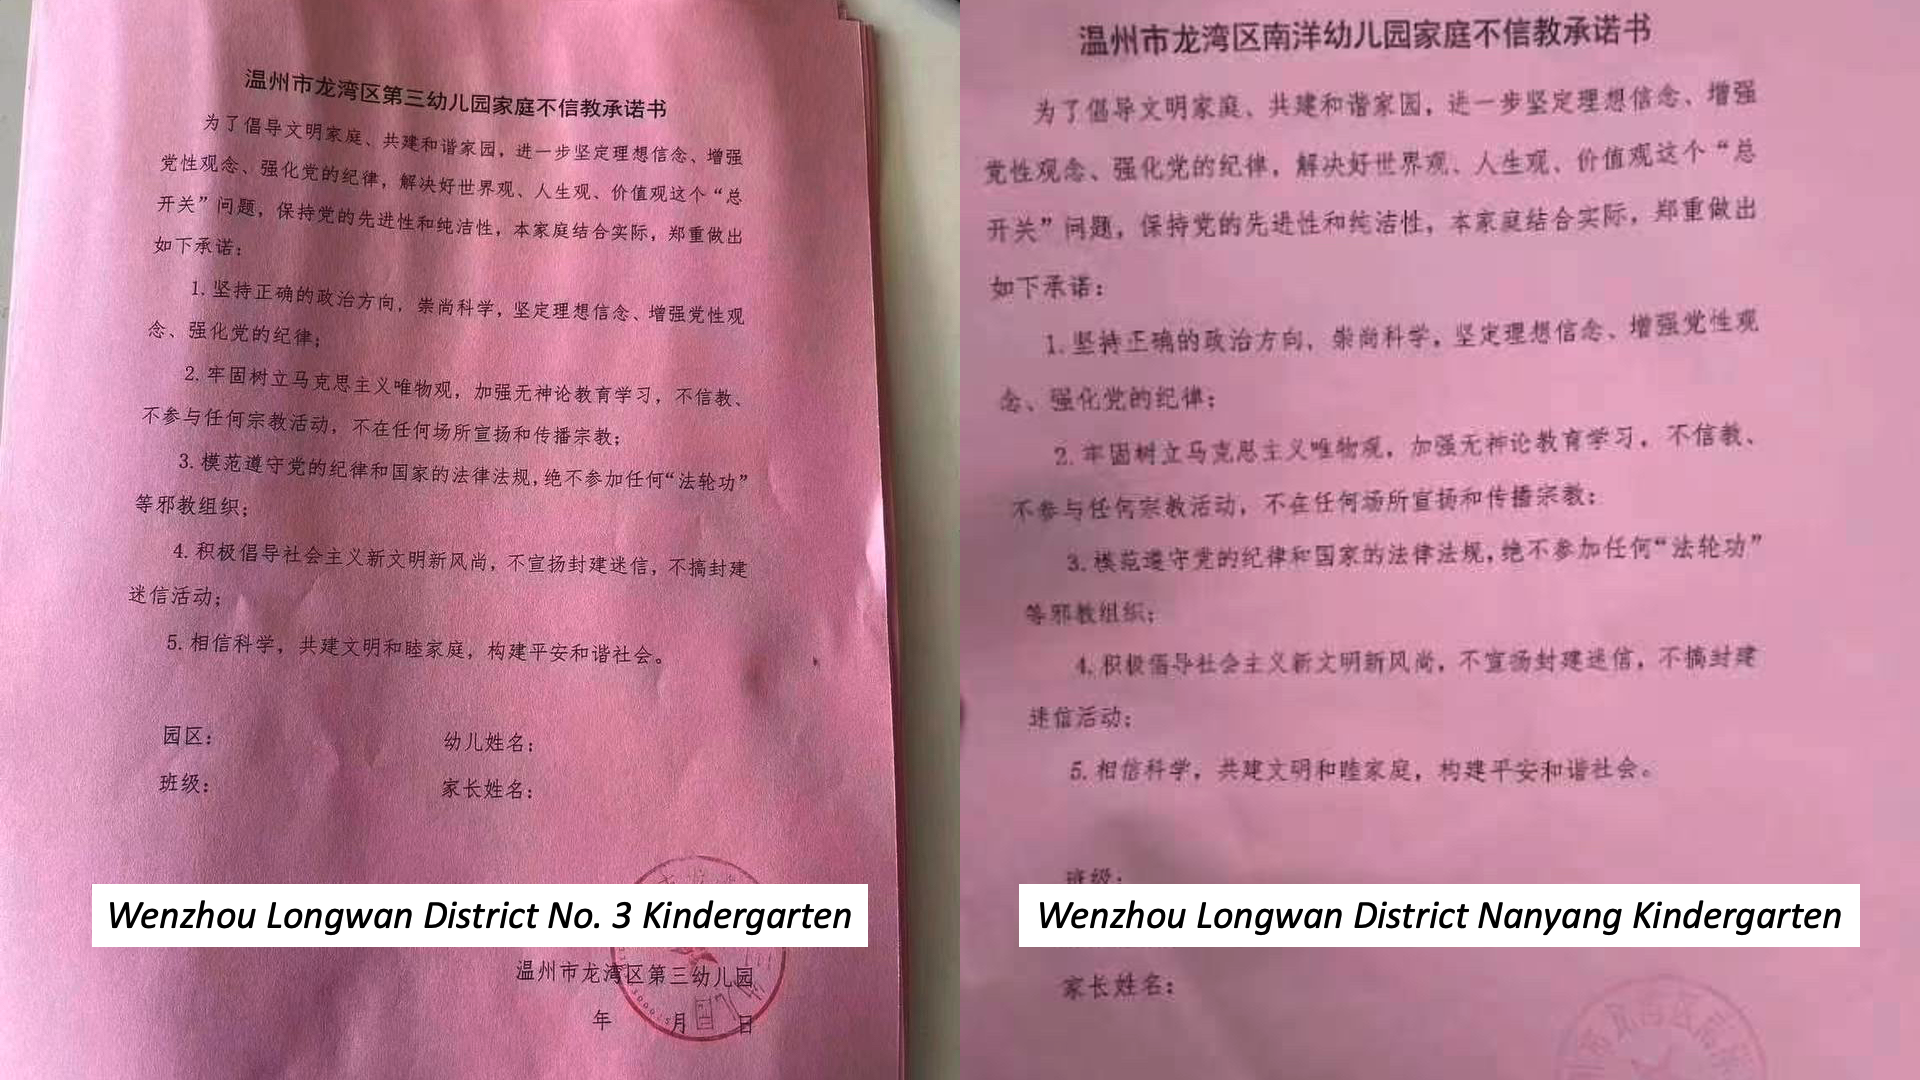 Two family commitment pledges to non-belief from two kindergartens in Wenzhou, cropped side-by-side. 